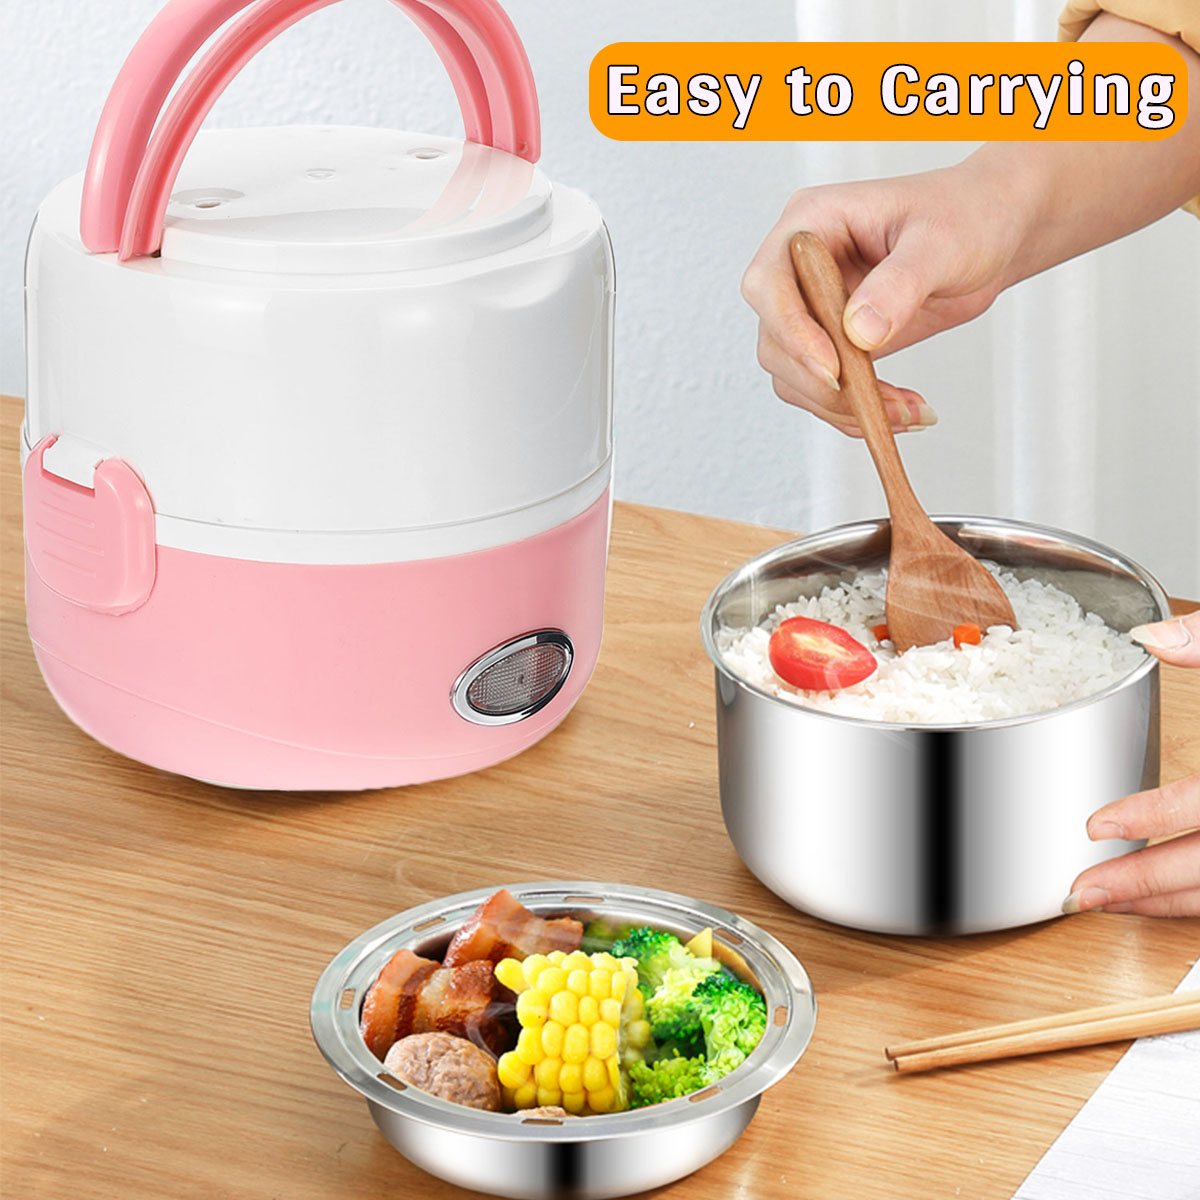 230W-13L-Portable-Electric-Stainless-Steel-Lunch-Bento-Box-Picnic-Bag-Heated-Food-Storage-Warmer-Hot-1661057-7